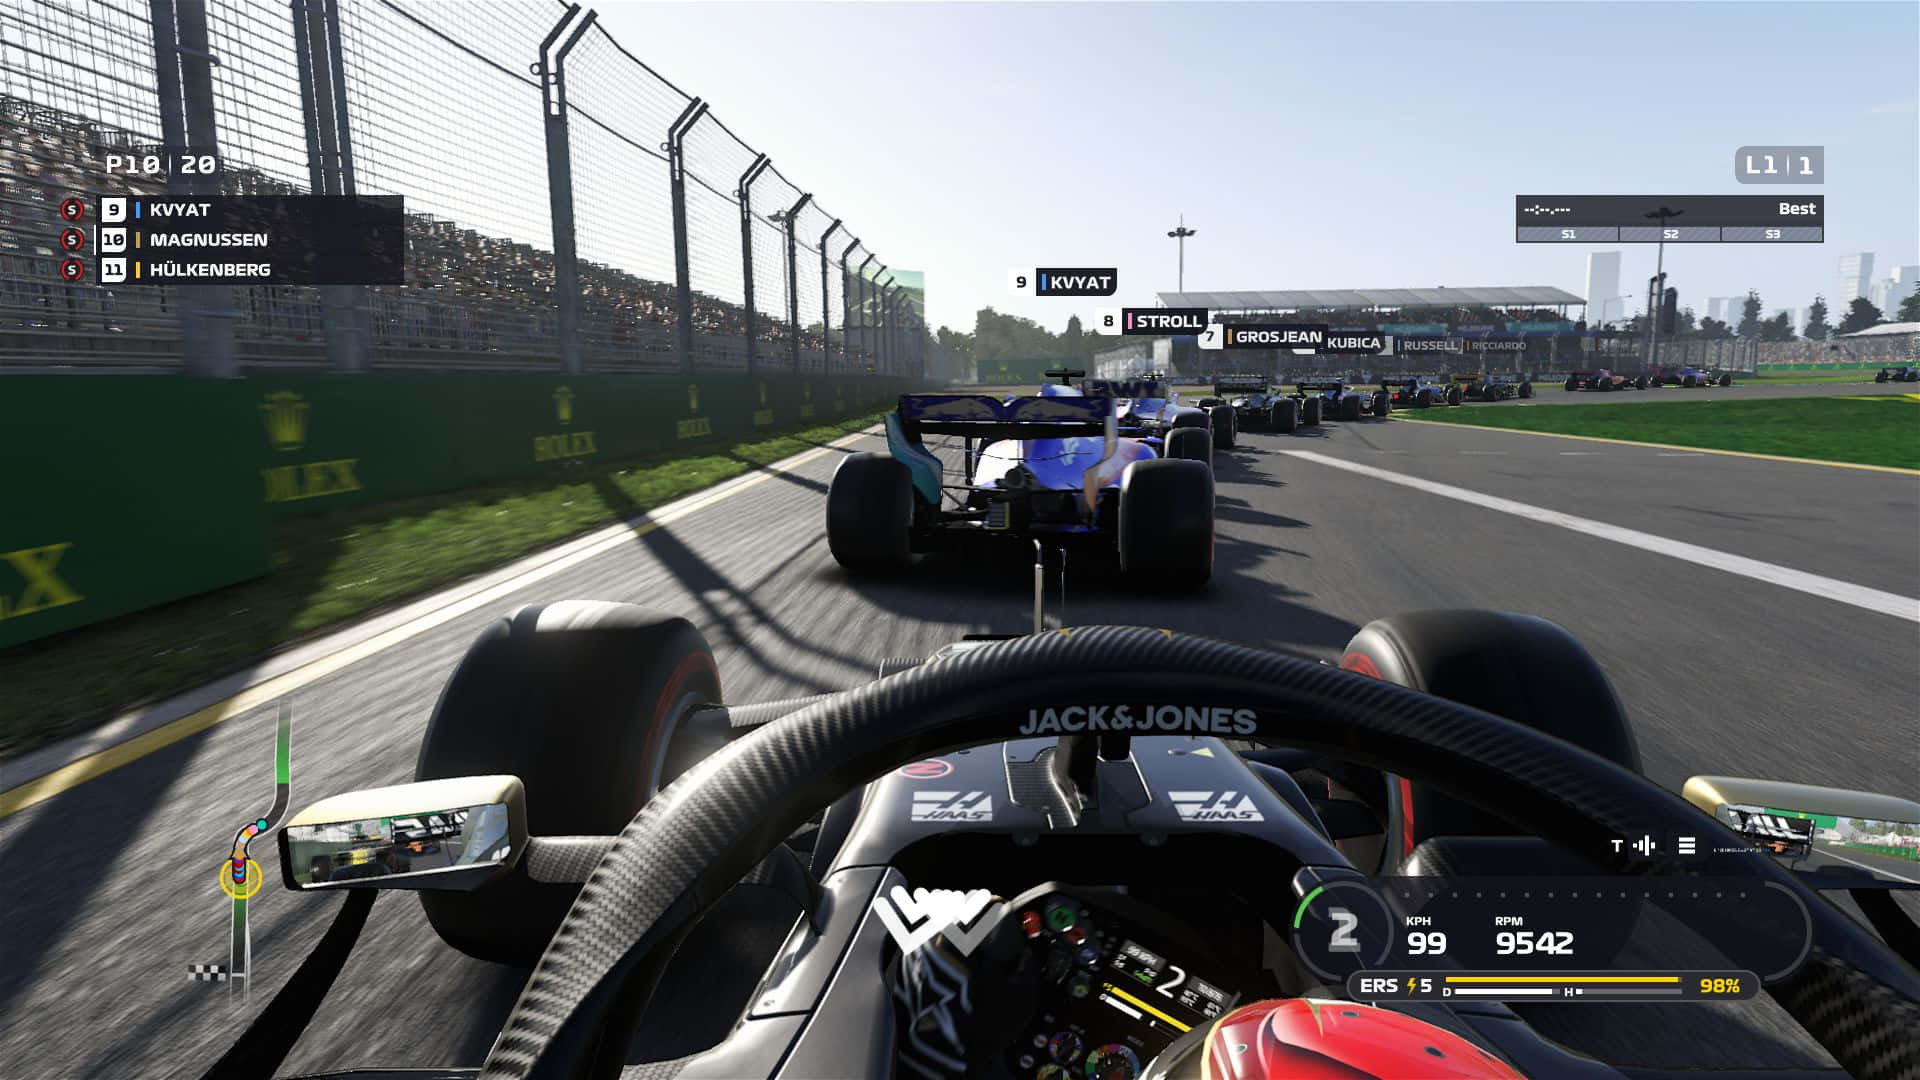 Pov Of Driver For Formula 1 Racing Hd F1 Background